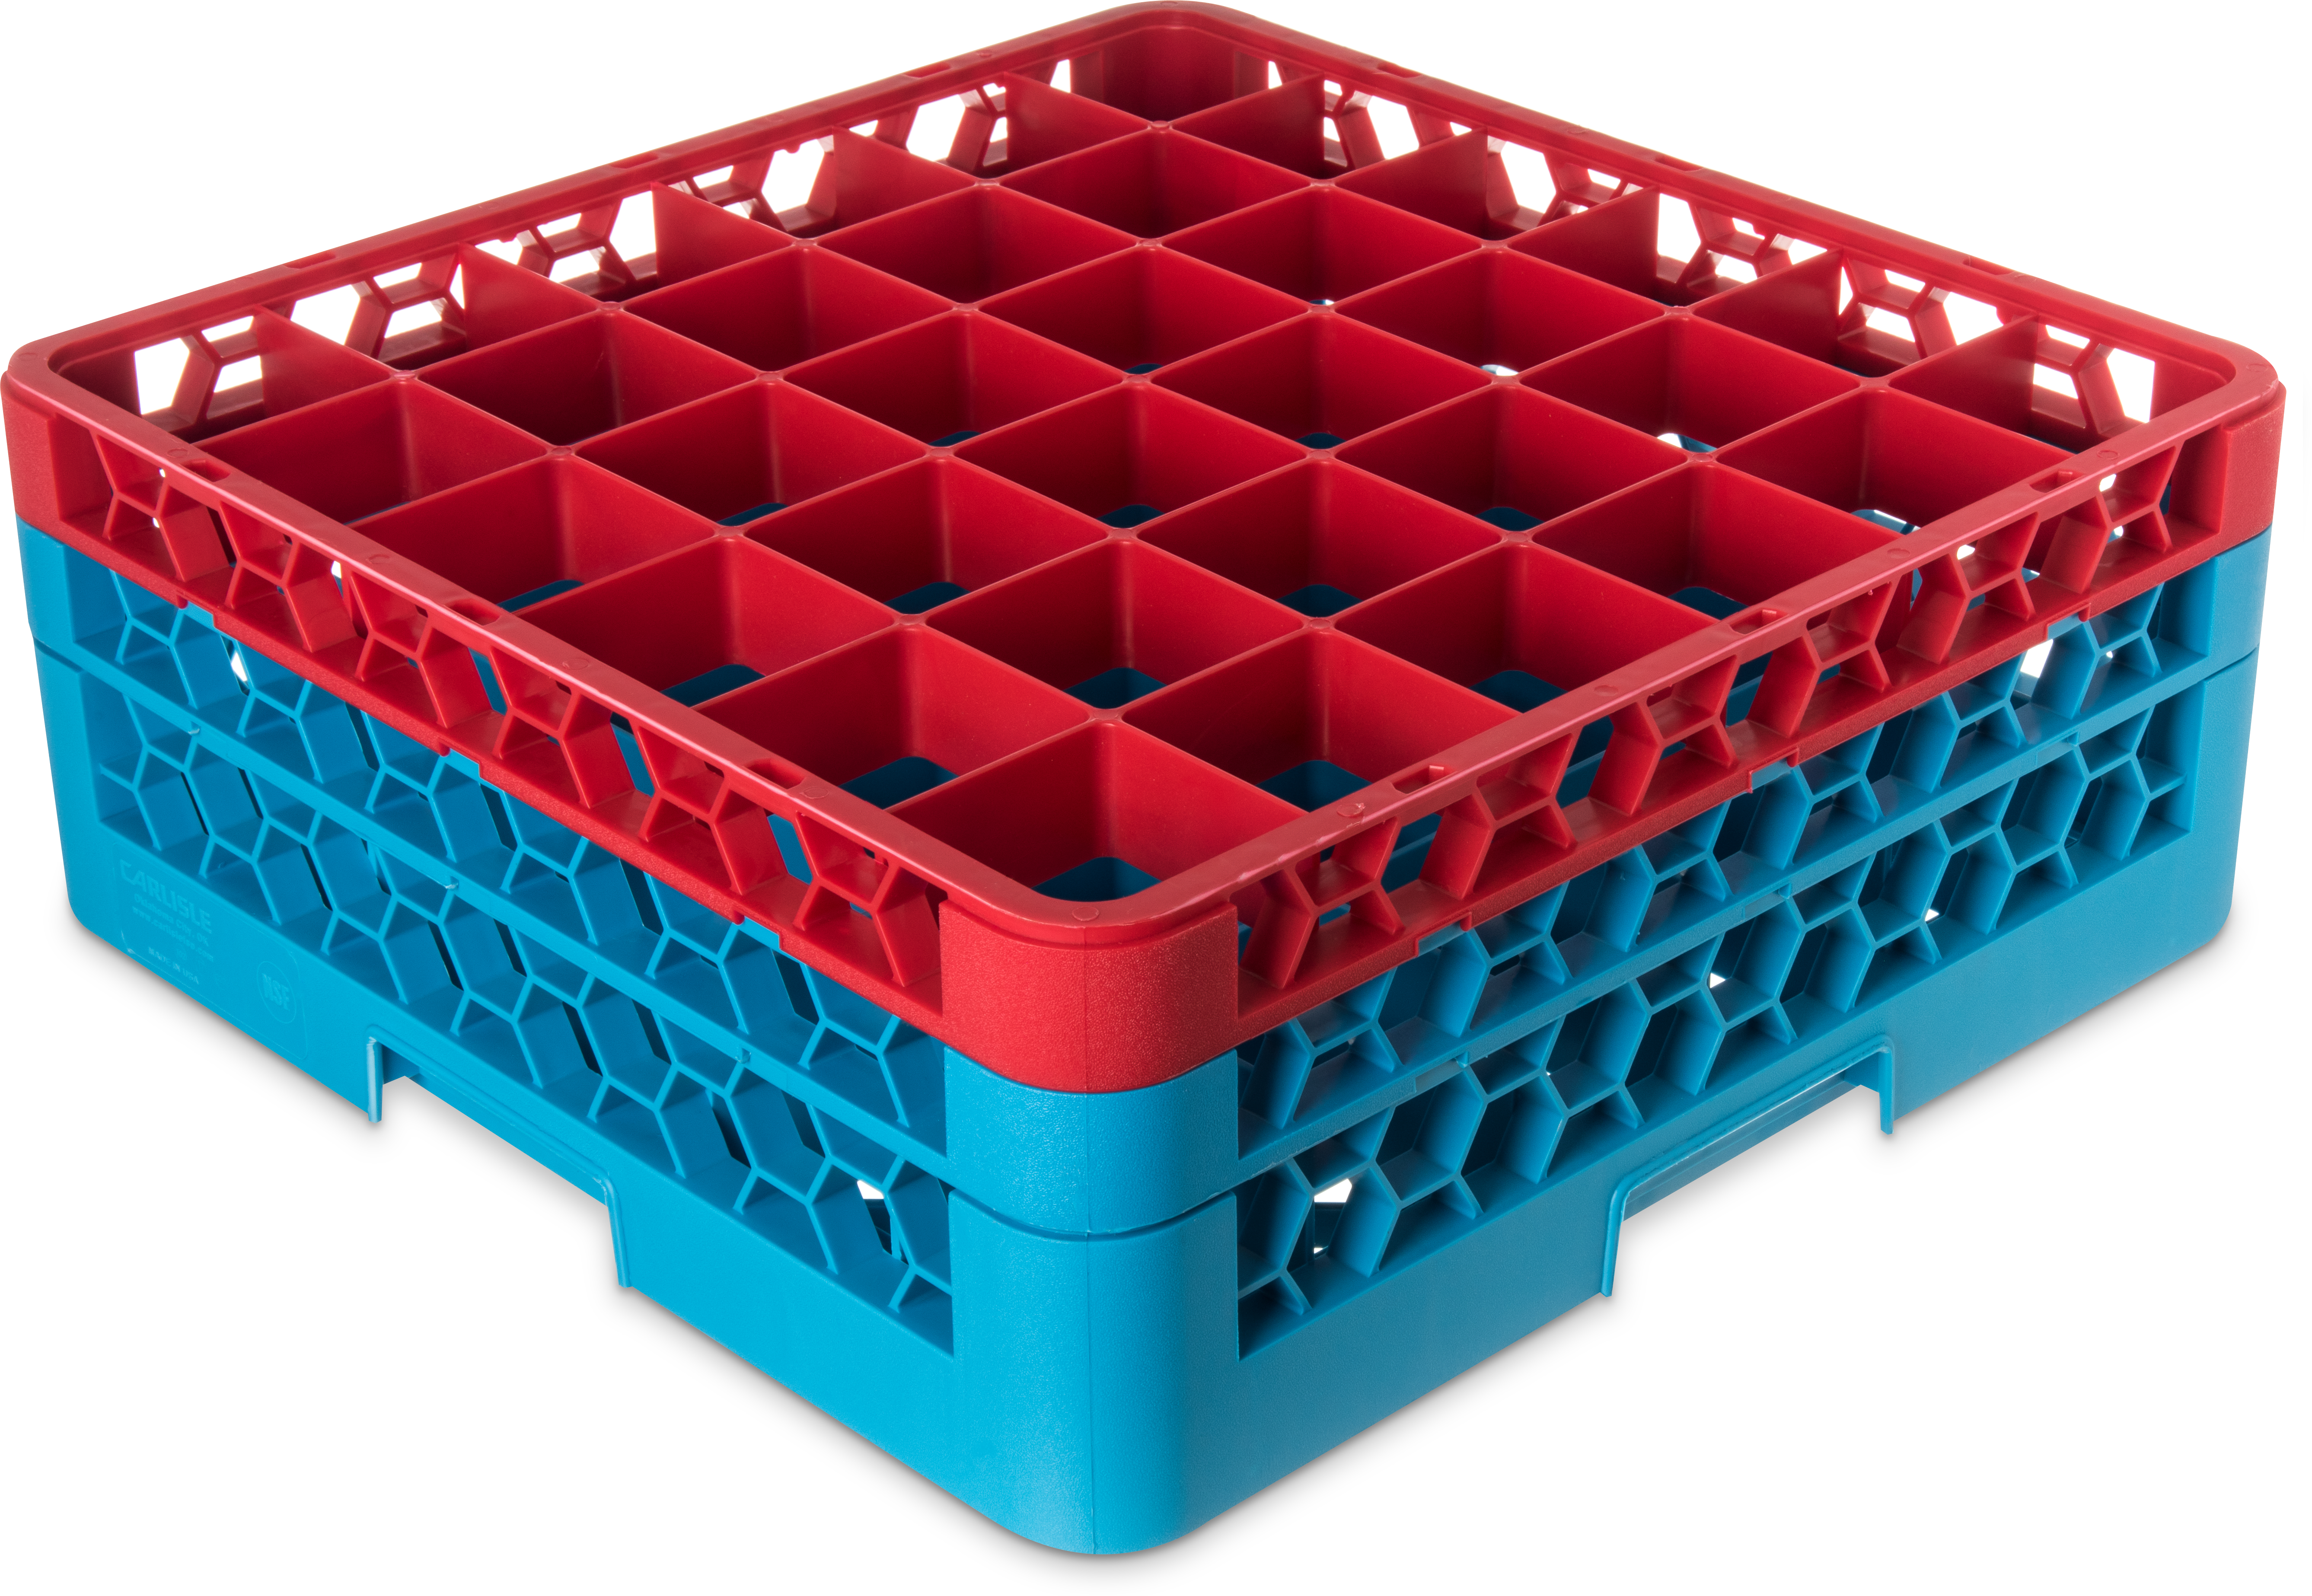 OptiClean 36 Compartment Glass Rack with 2 Extenders 7.12 - Red-Carlisle Blue